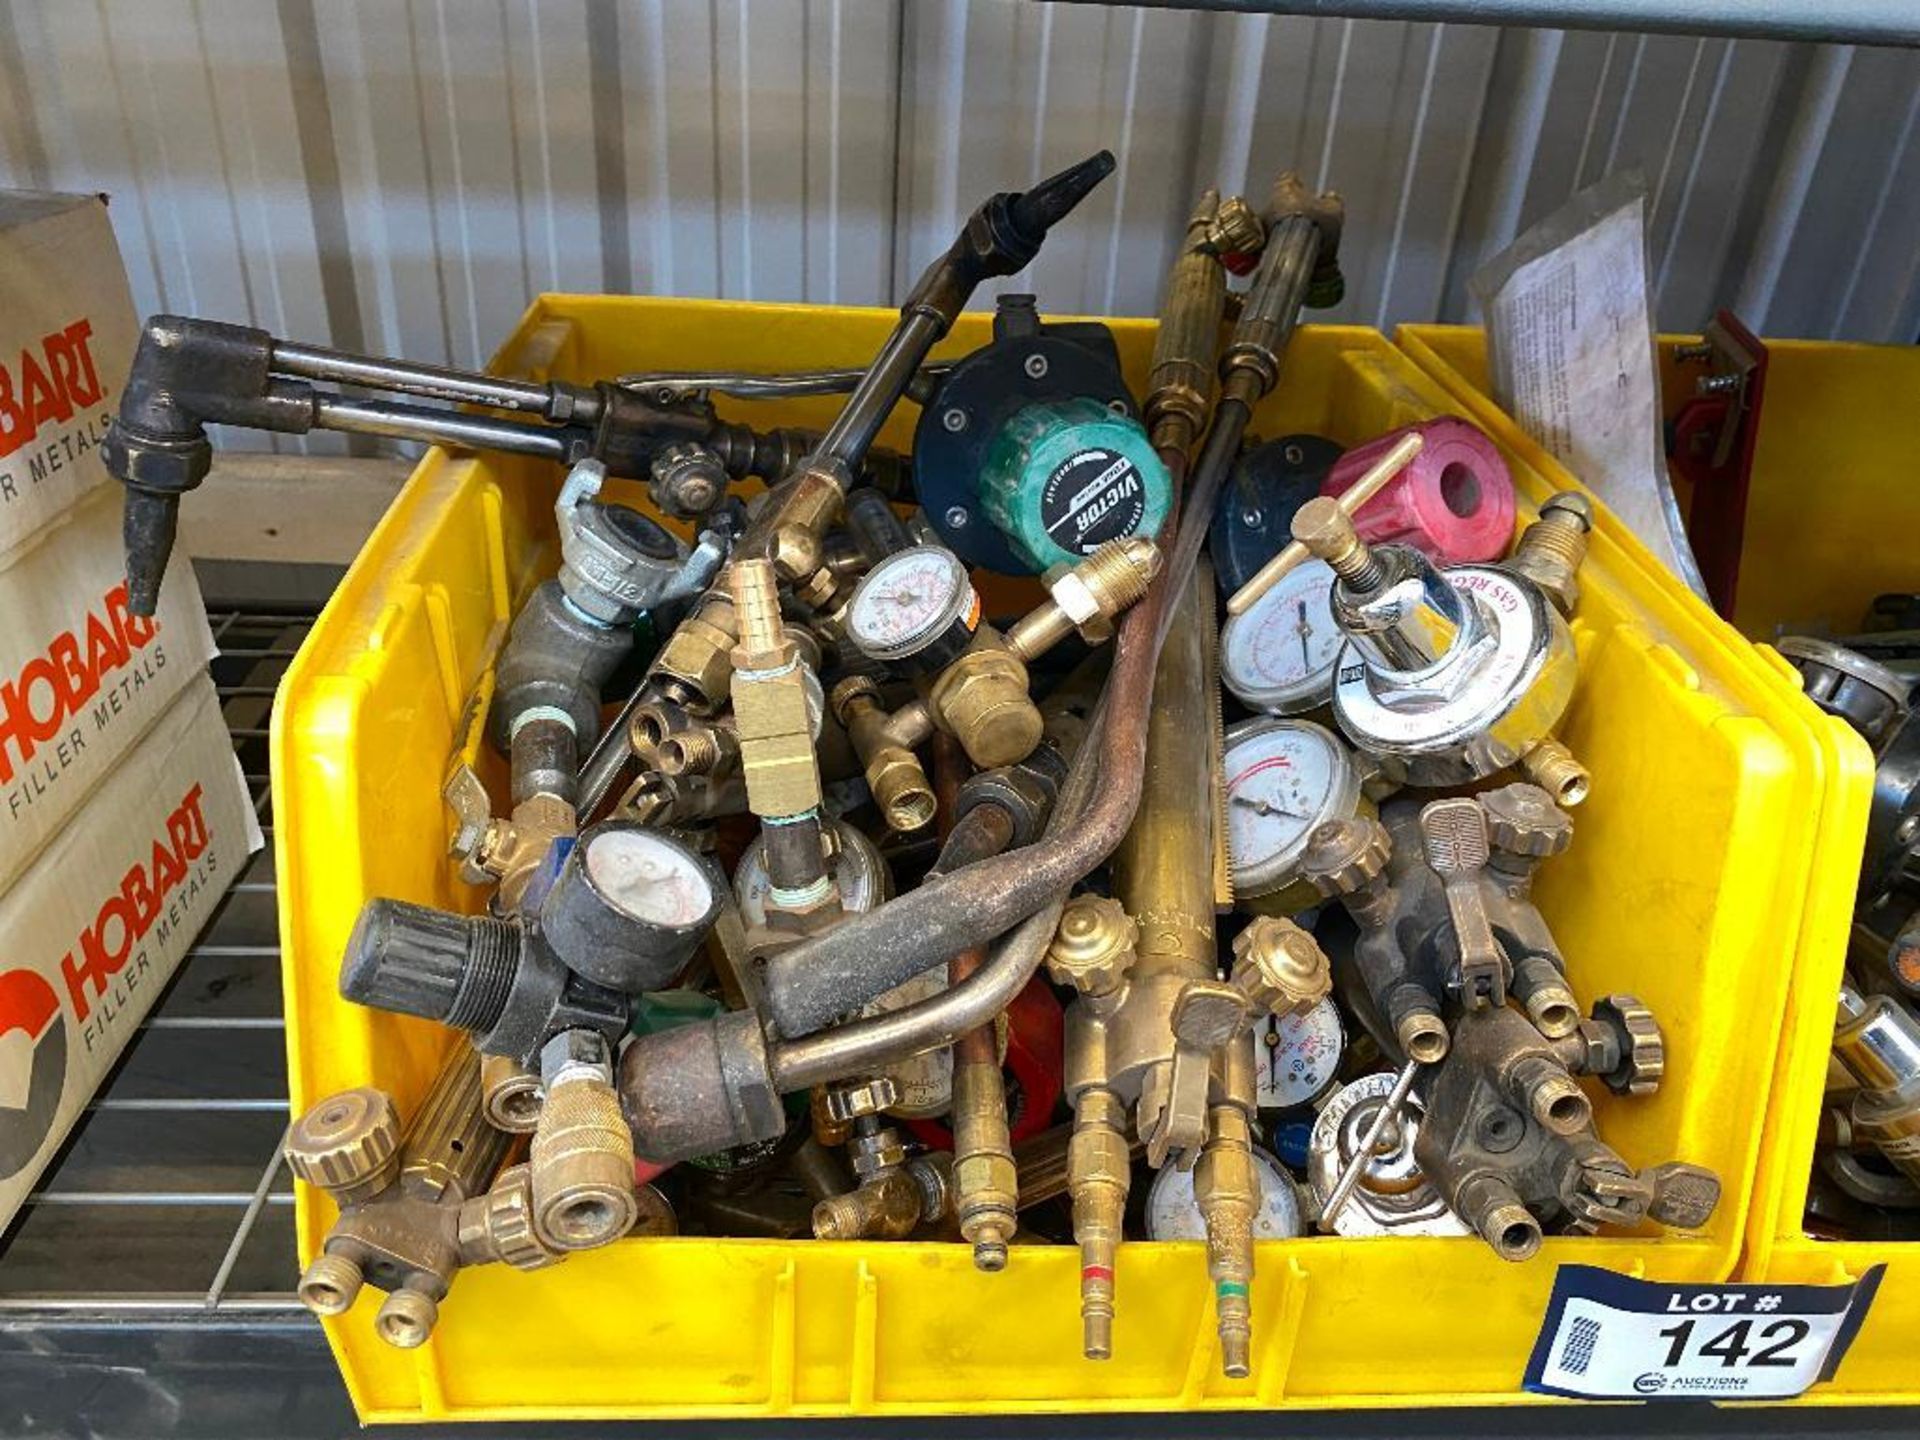 Lot of Asst. Oxy/ Acetylene Torches, Gauges, etc. - Image 2 of 3